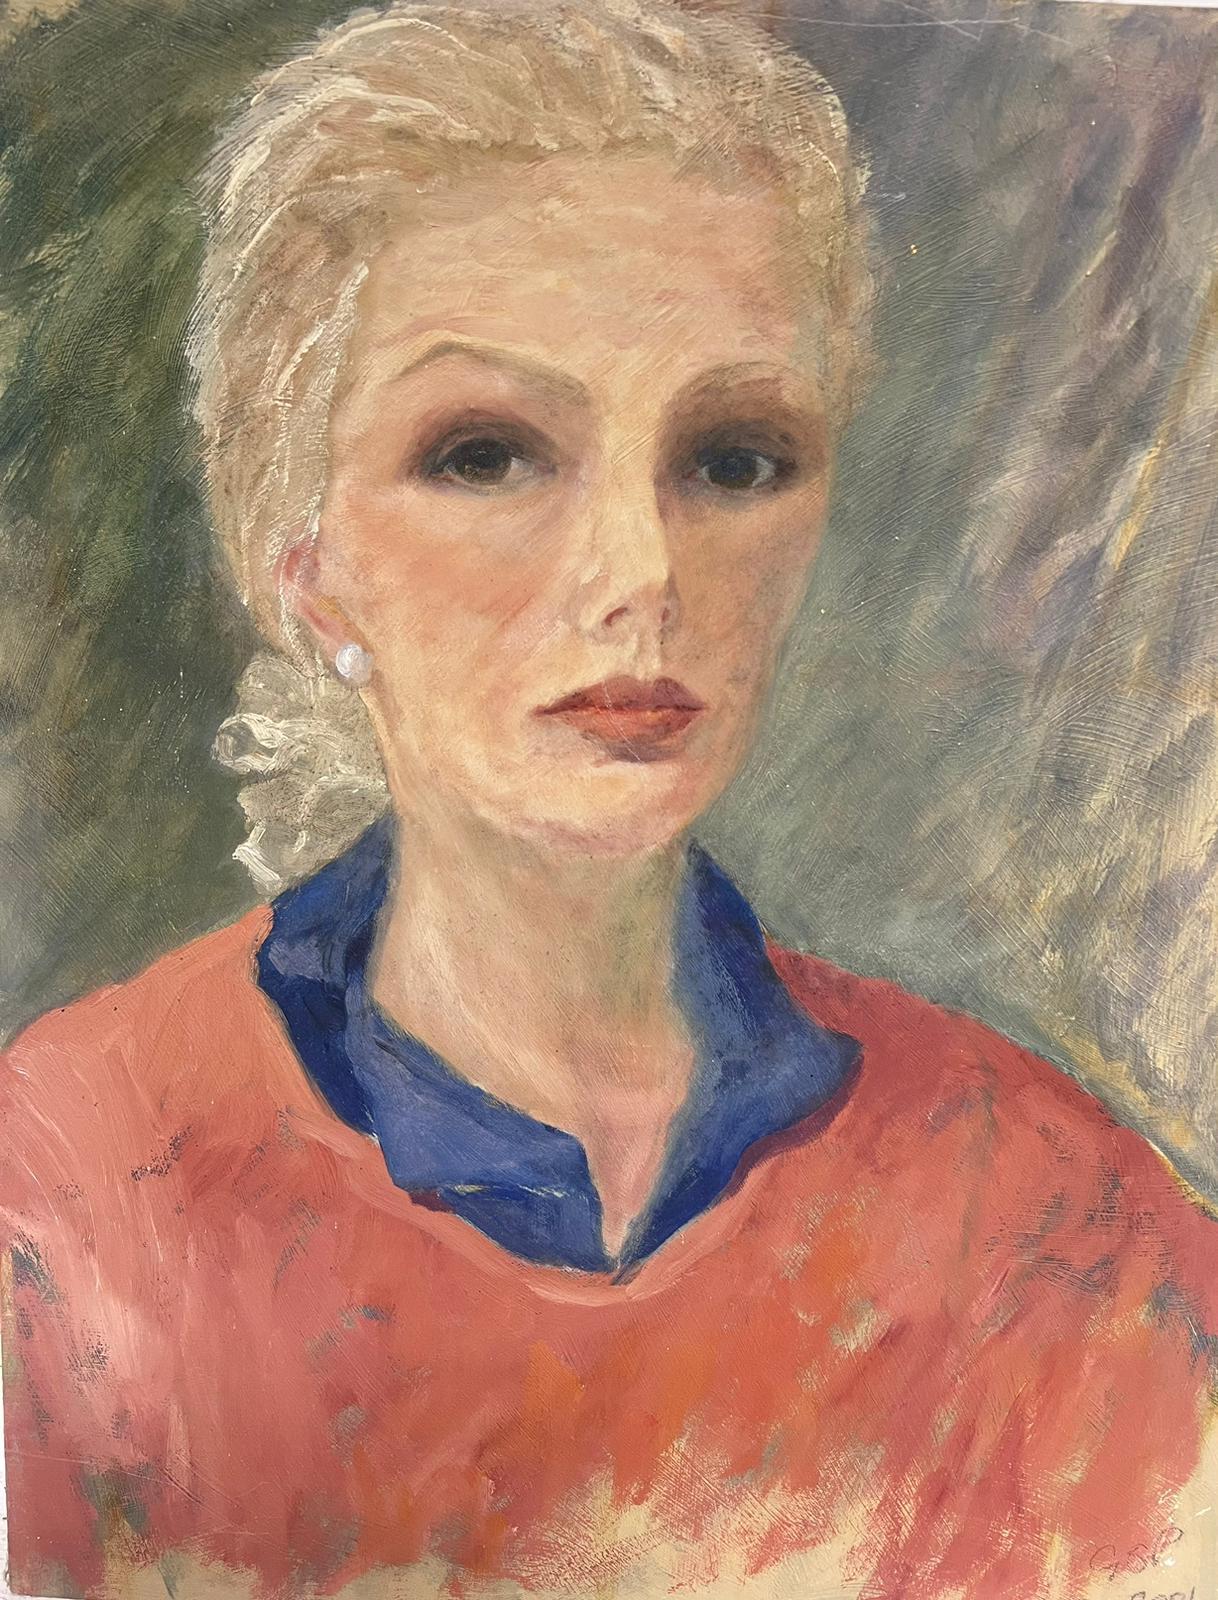 Geza Somerset-Paddon Portrait Painting - Contemporary British Modernist Oil Painting Portrait of Woman in Pink